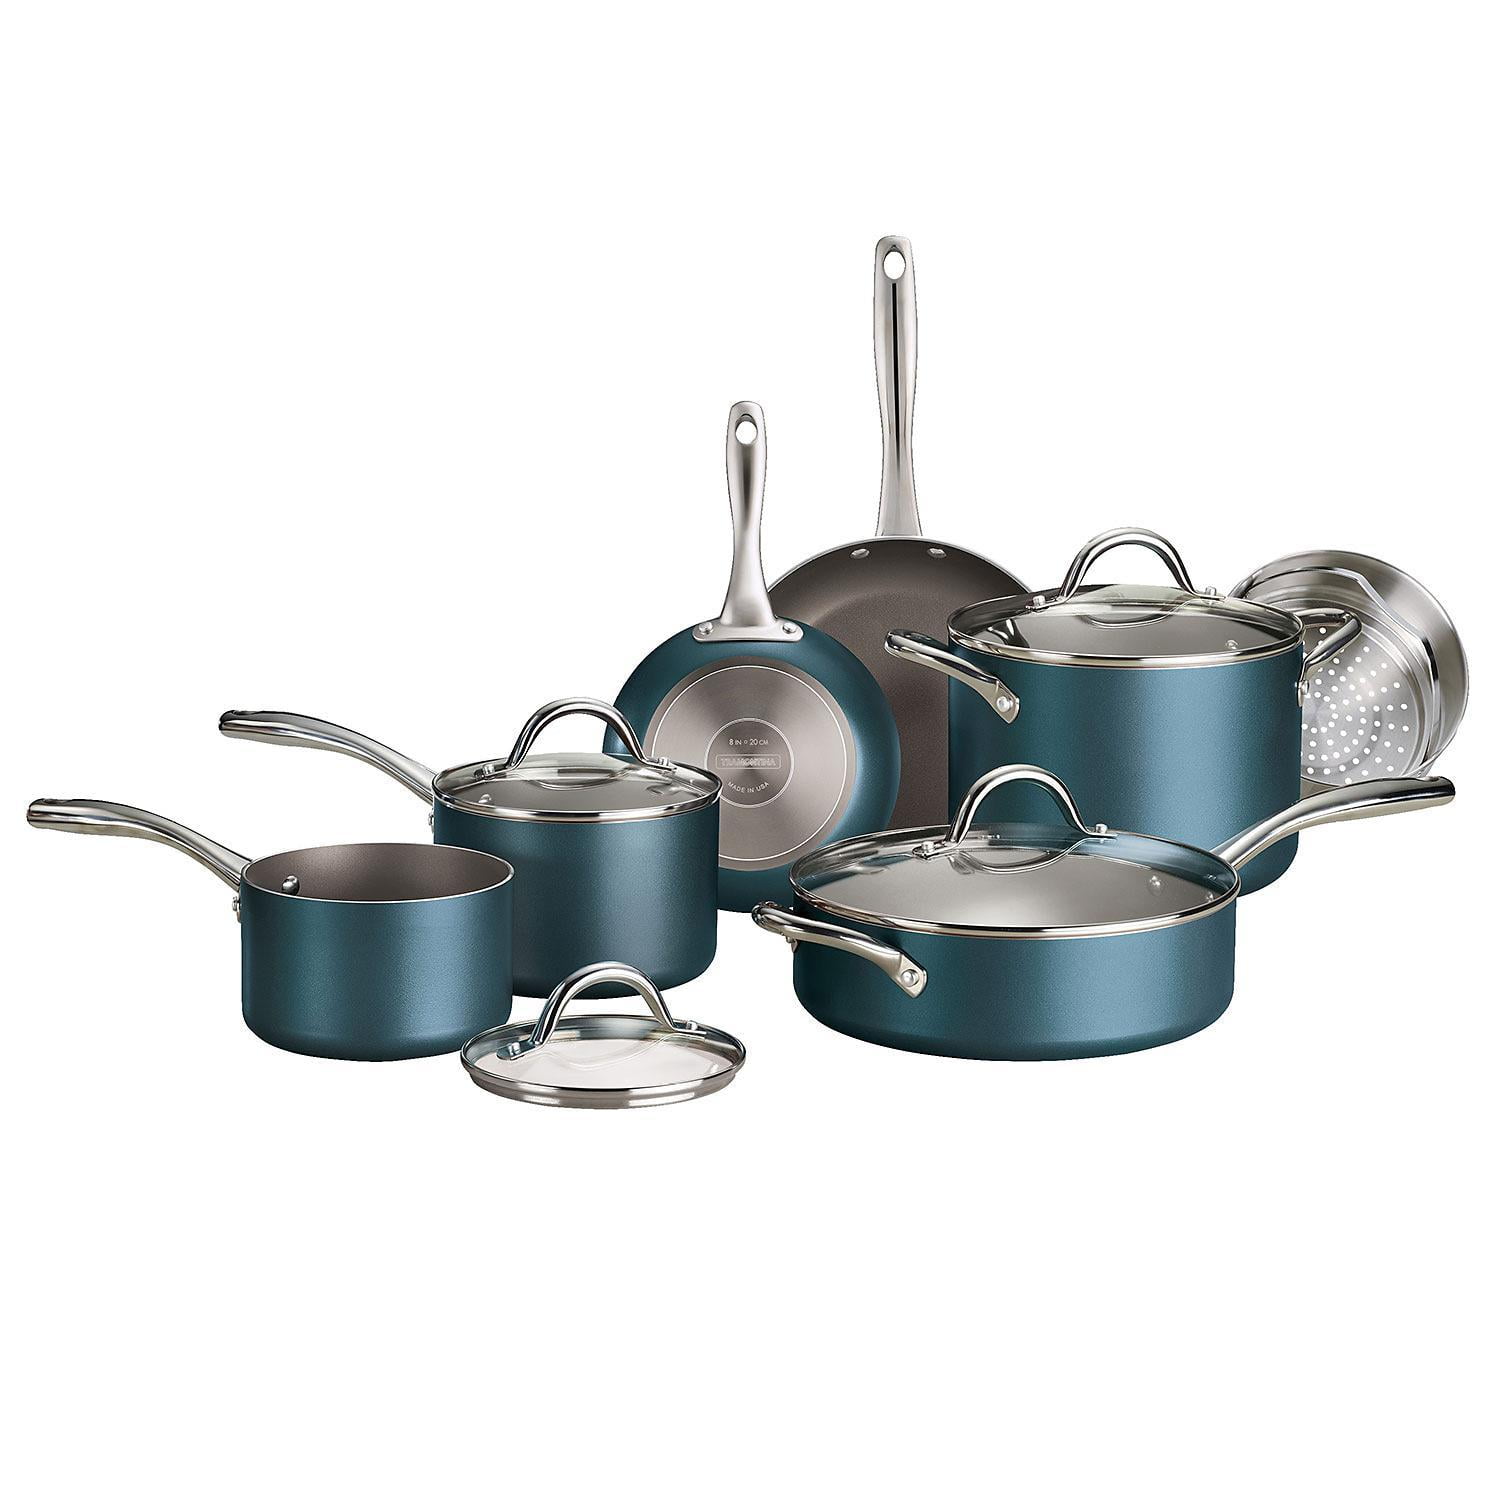 Tramontina 11-Piece Non-stick Cookware Set (Assorted Colors